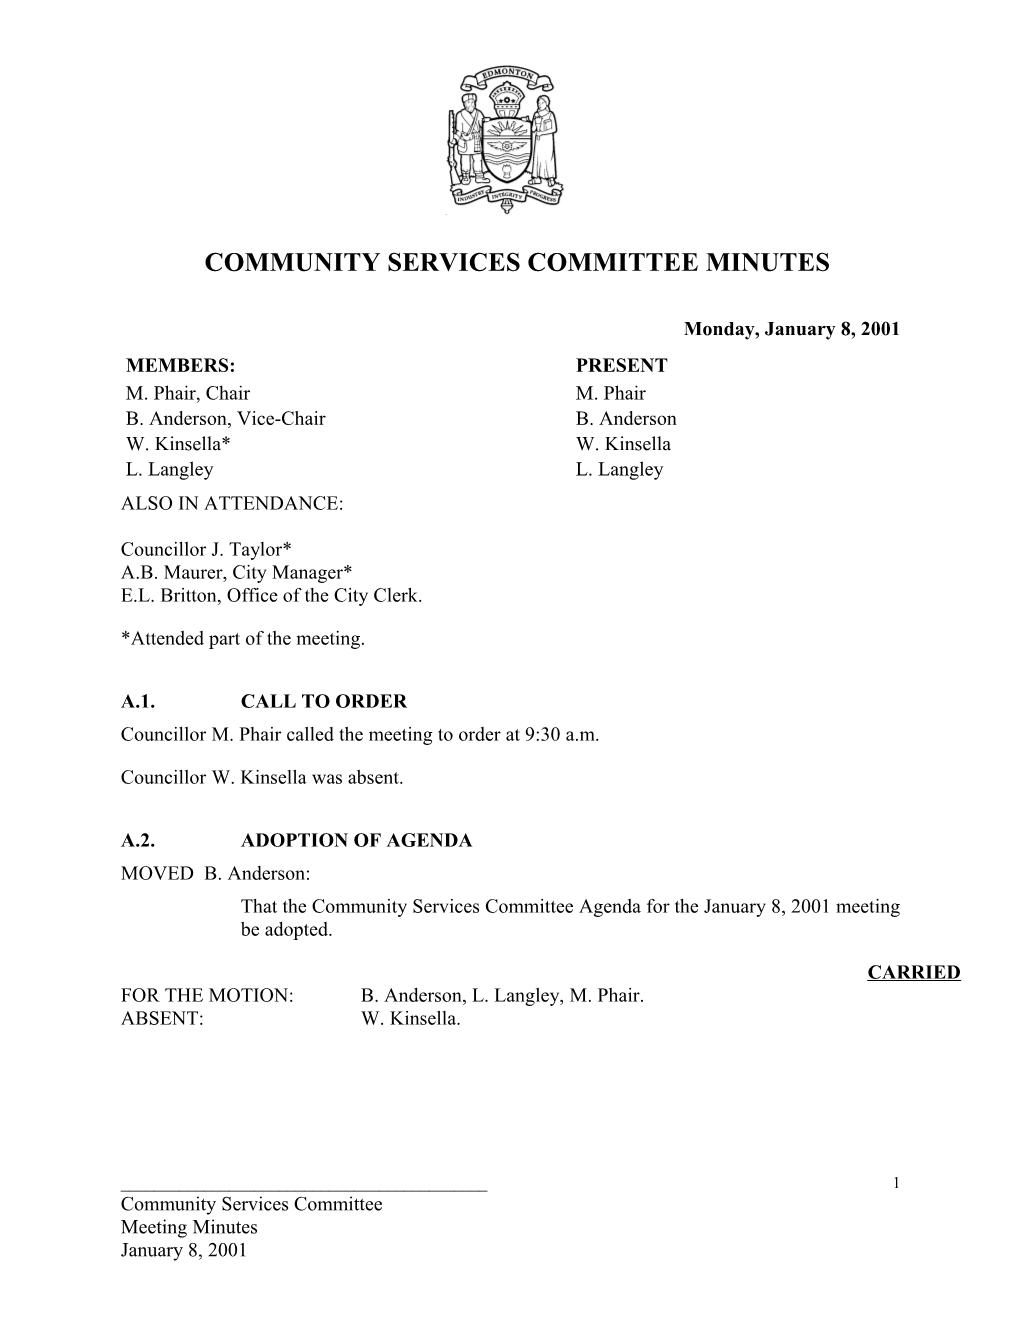 Minutes for Community Services Committee January 8, 2001 Meeting